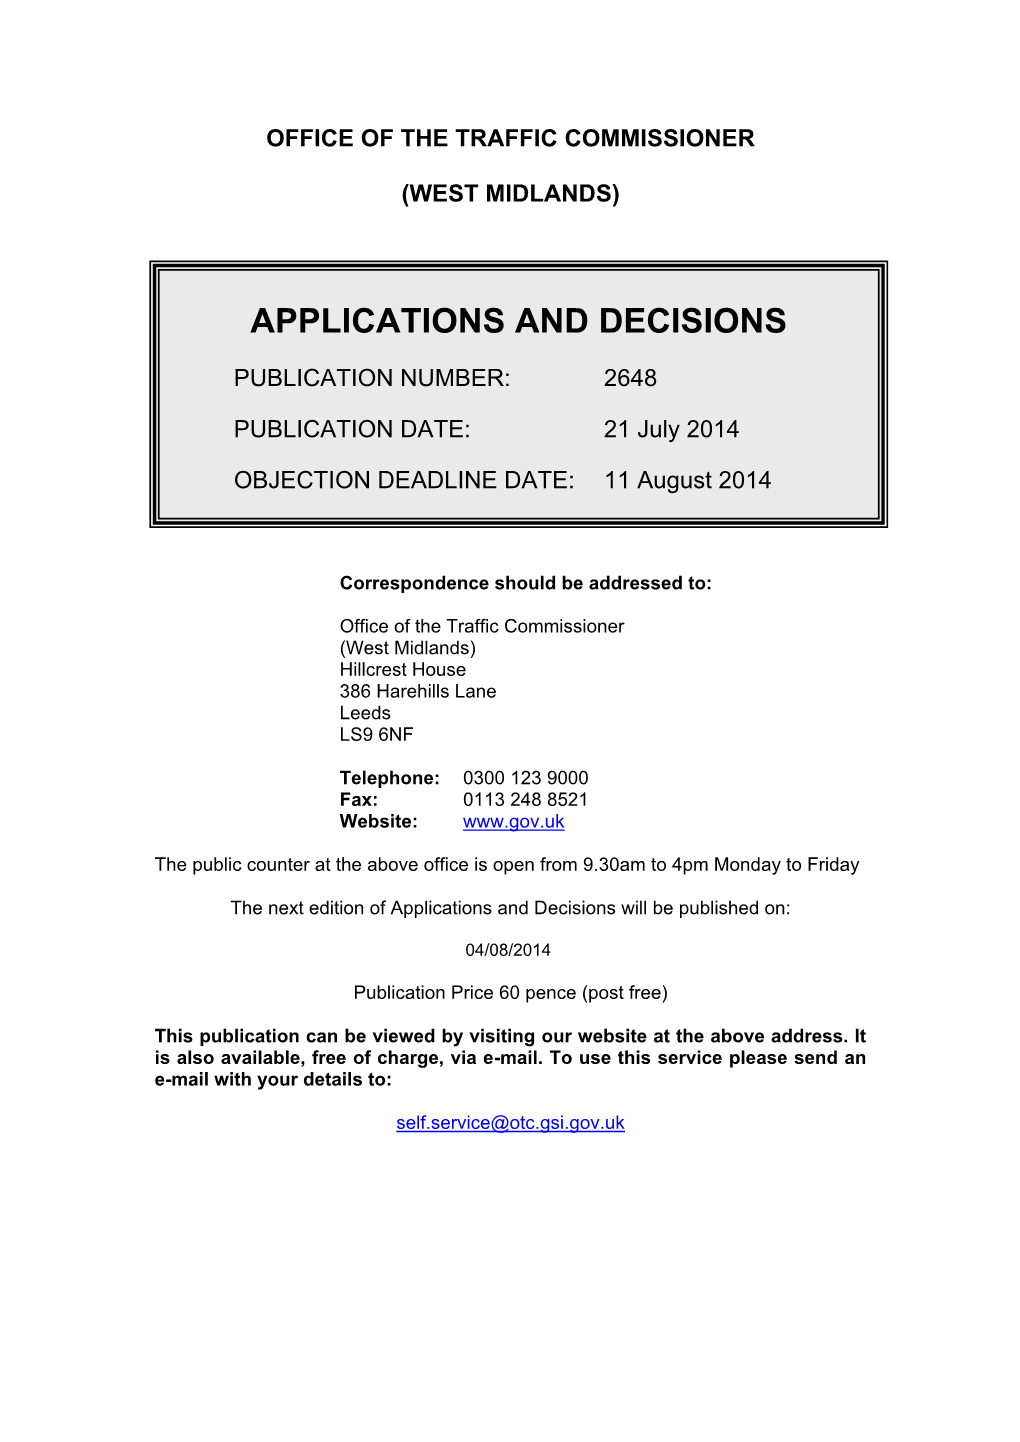 Applications and Decisions 21 July 2014